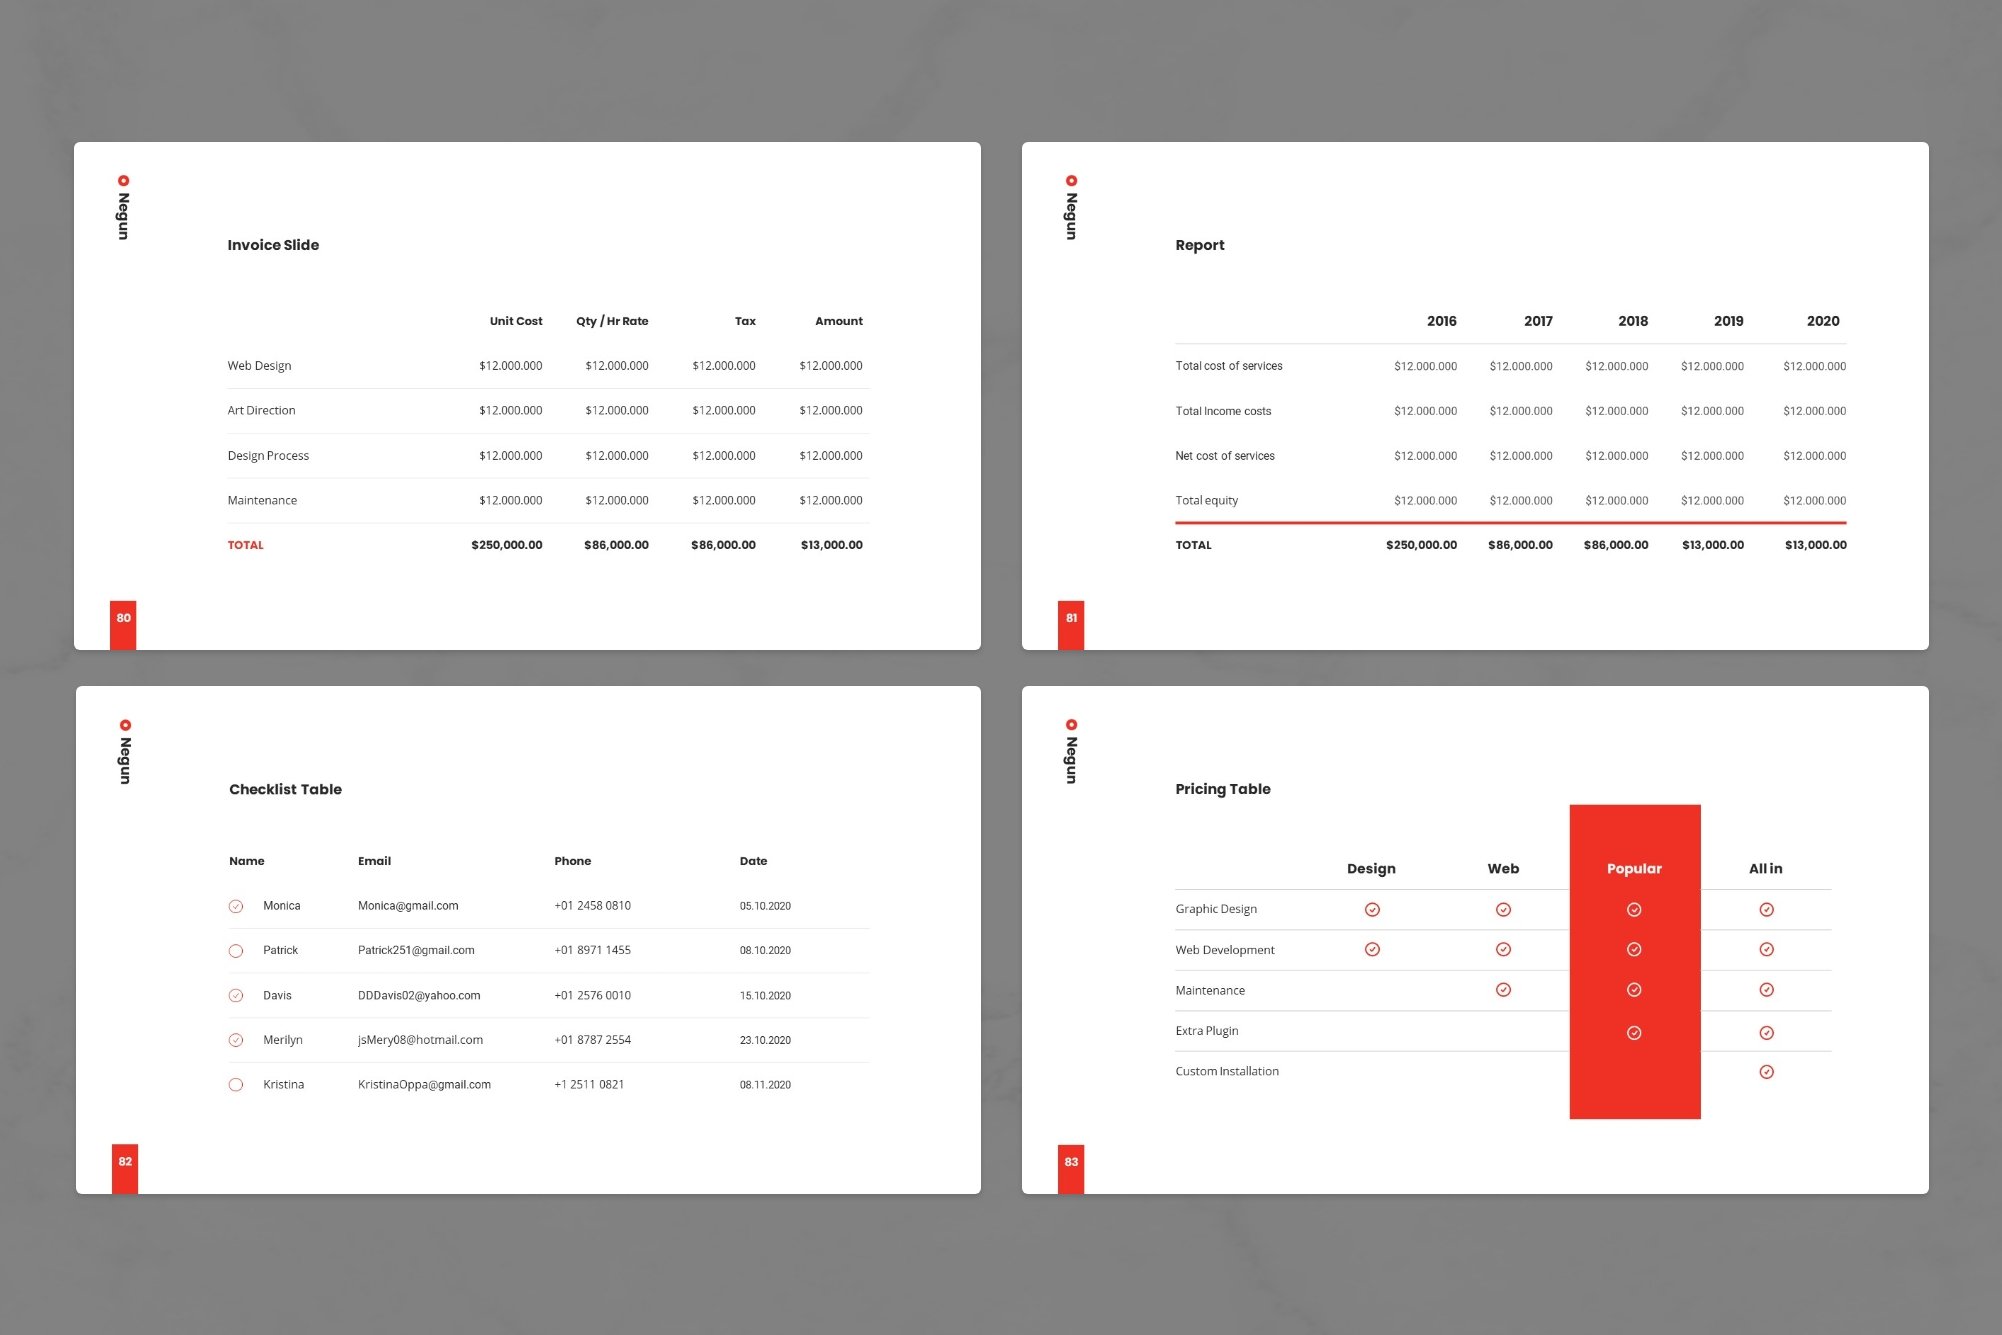 The commercial part of the template. Here are tables of pricing, budget, investment, etc.